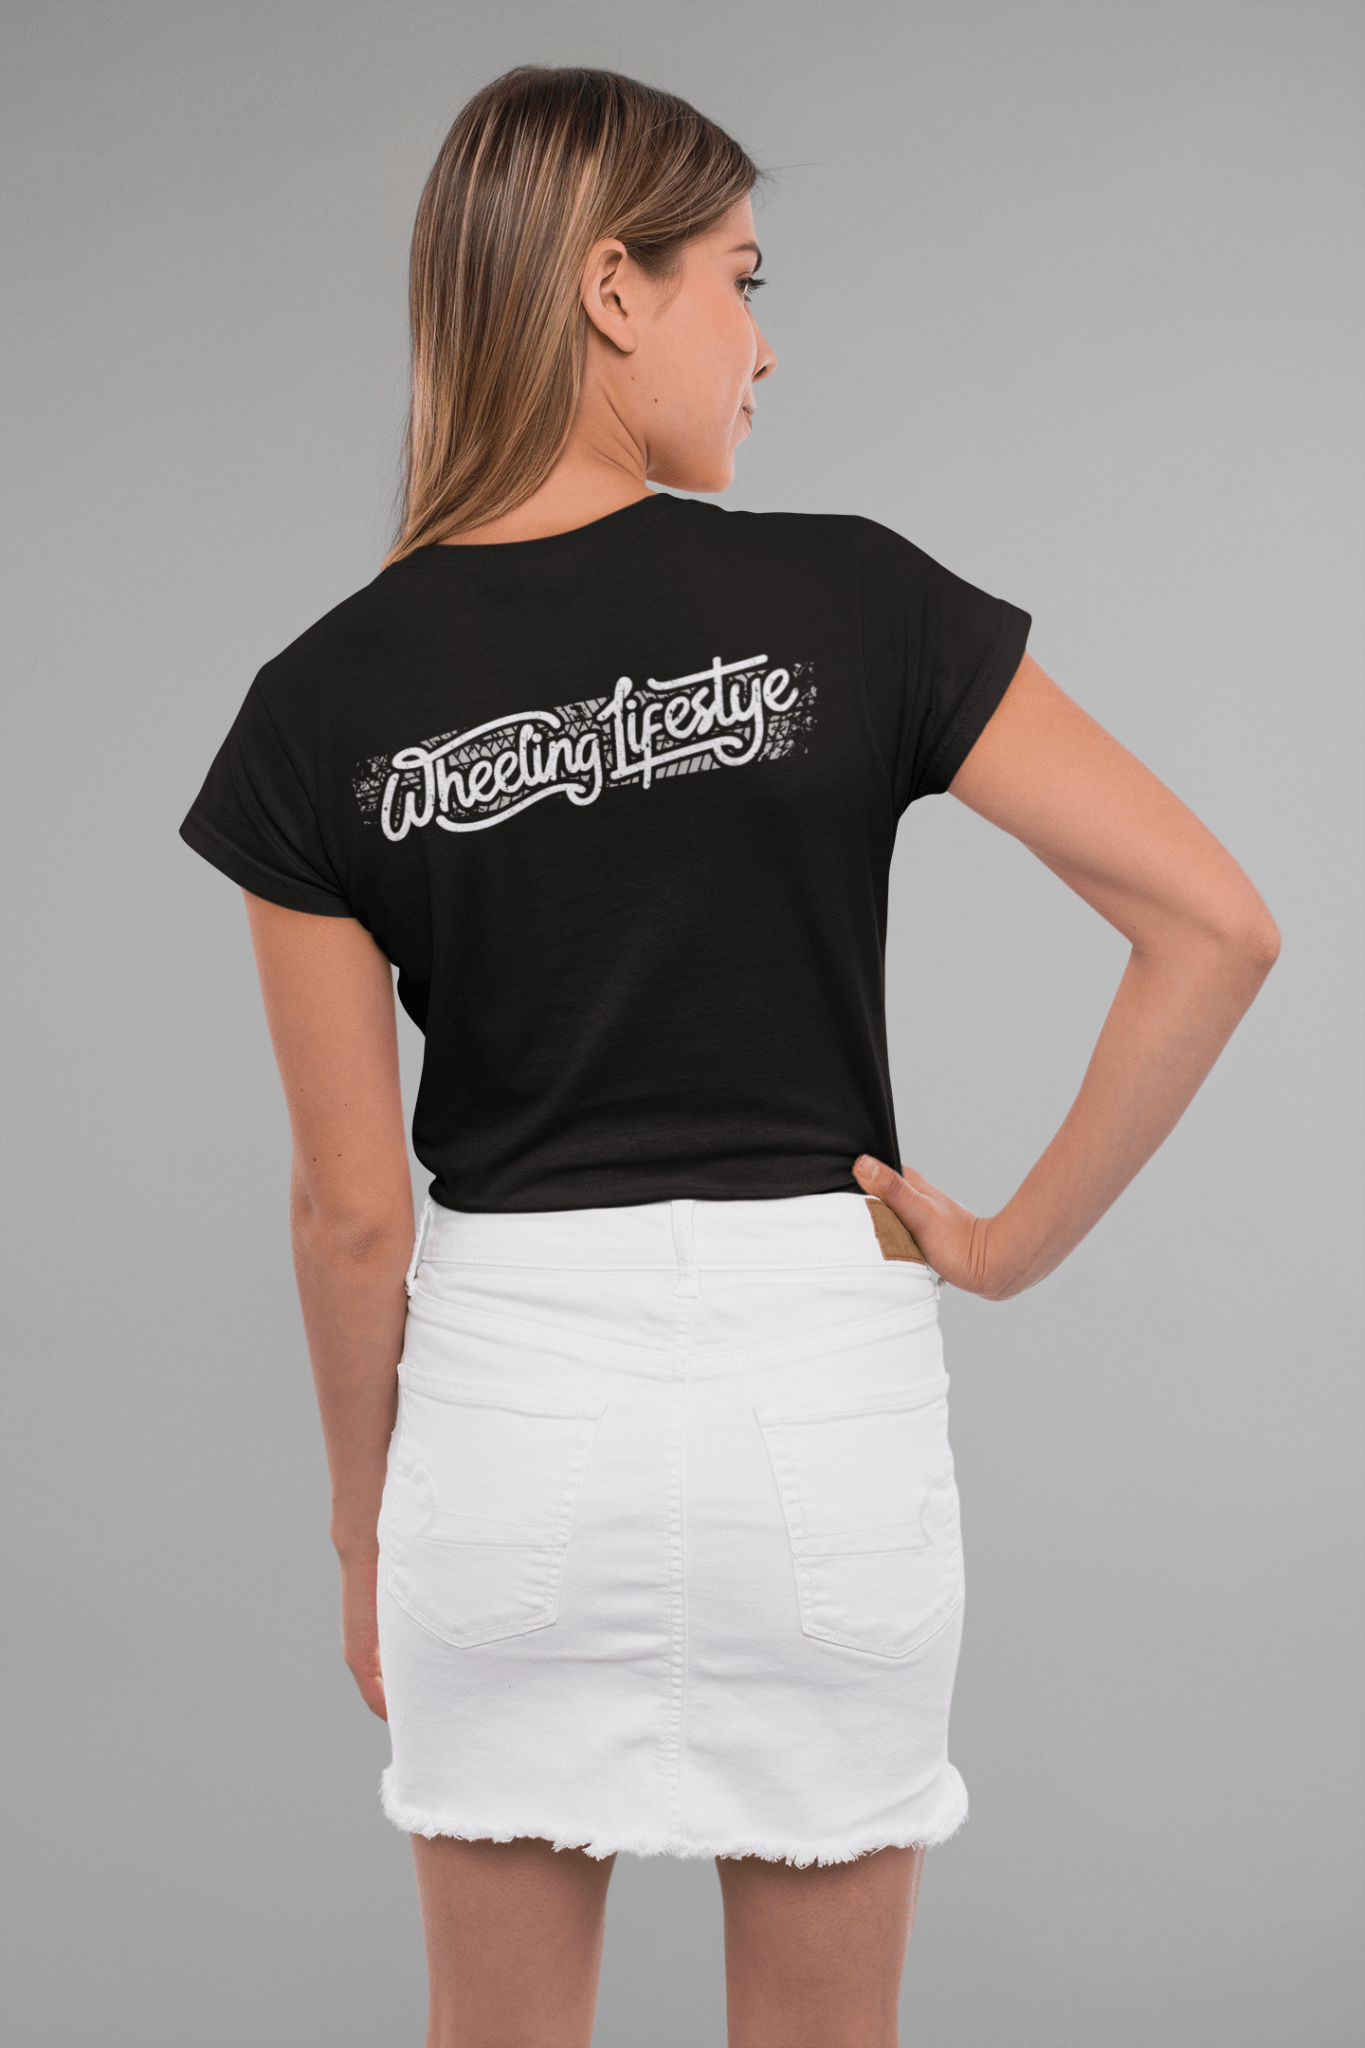 Wheeling Lifestyle Women's Graphic Tee - Goats Trail Off-Road Apparel Company